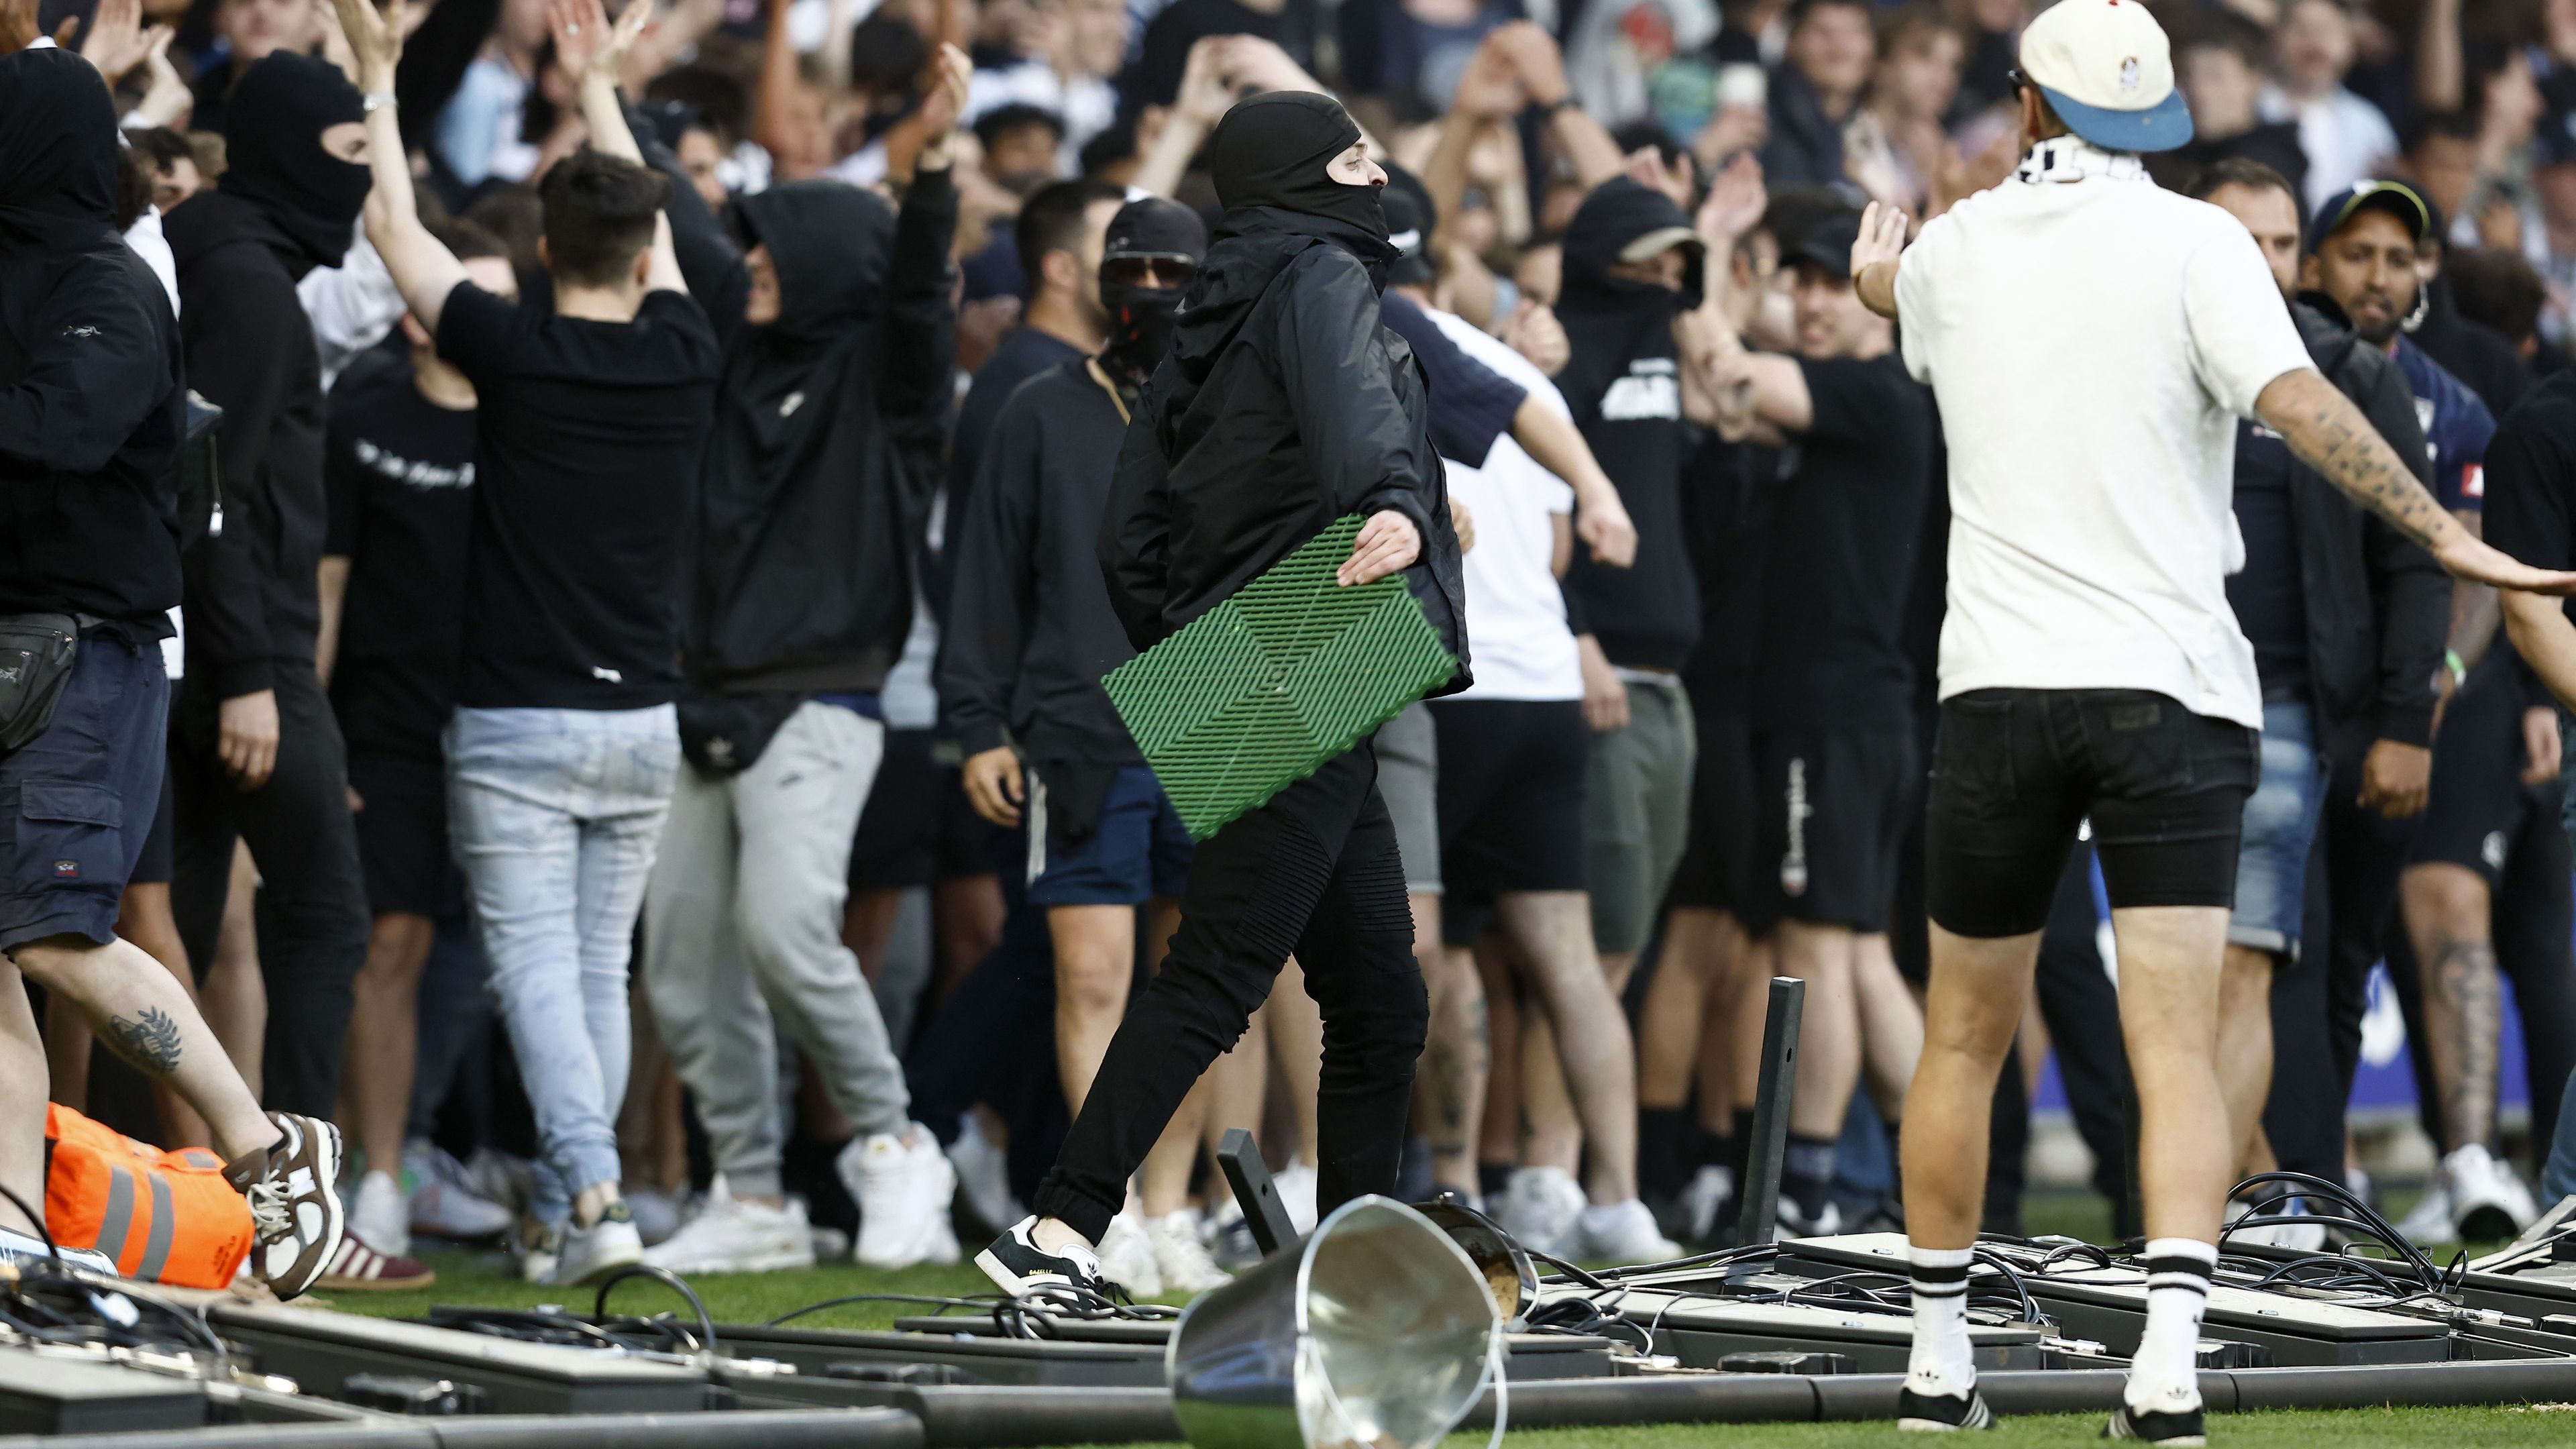 Further eight bans handed out by Football Australia after Melbourne Derby pitch invasion